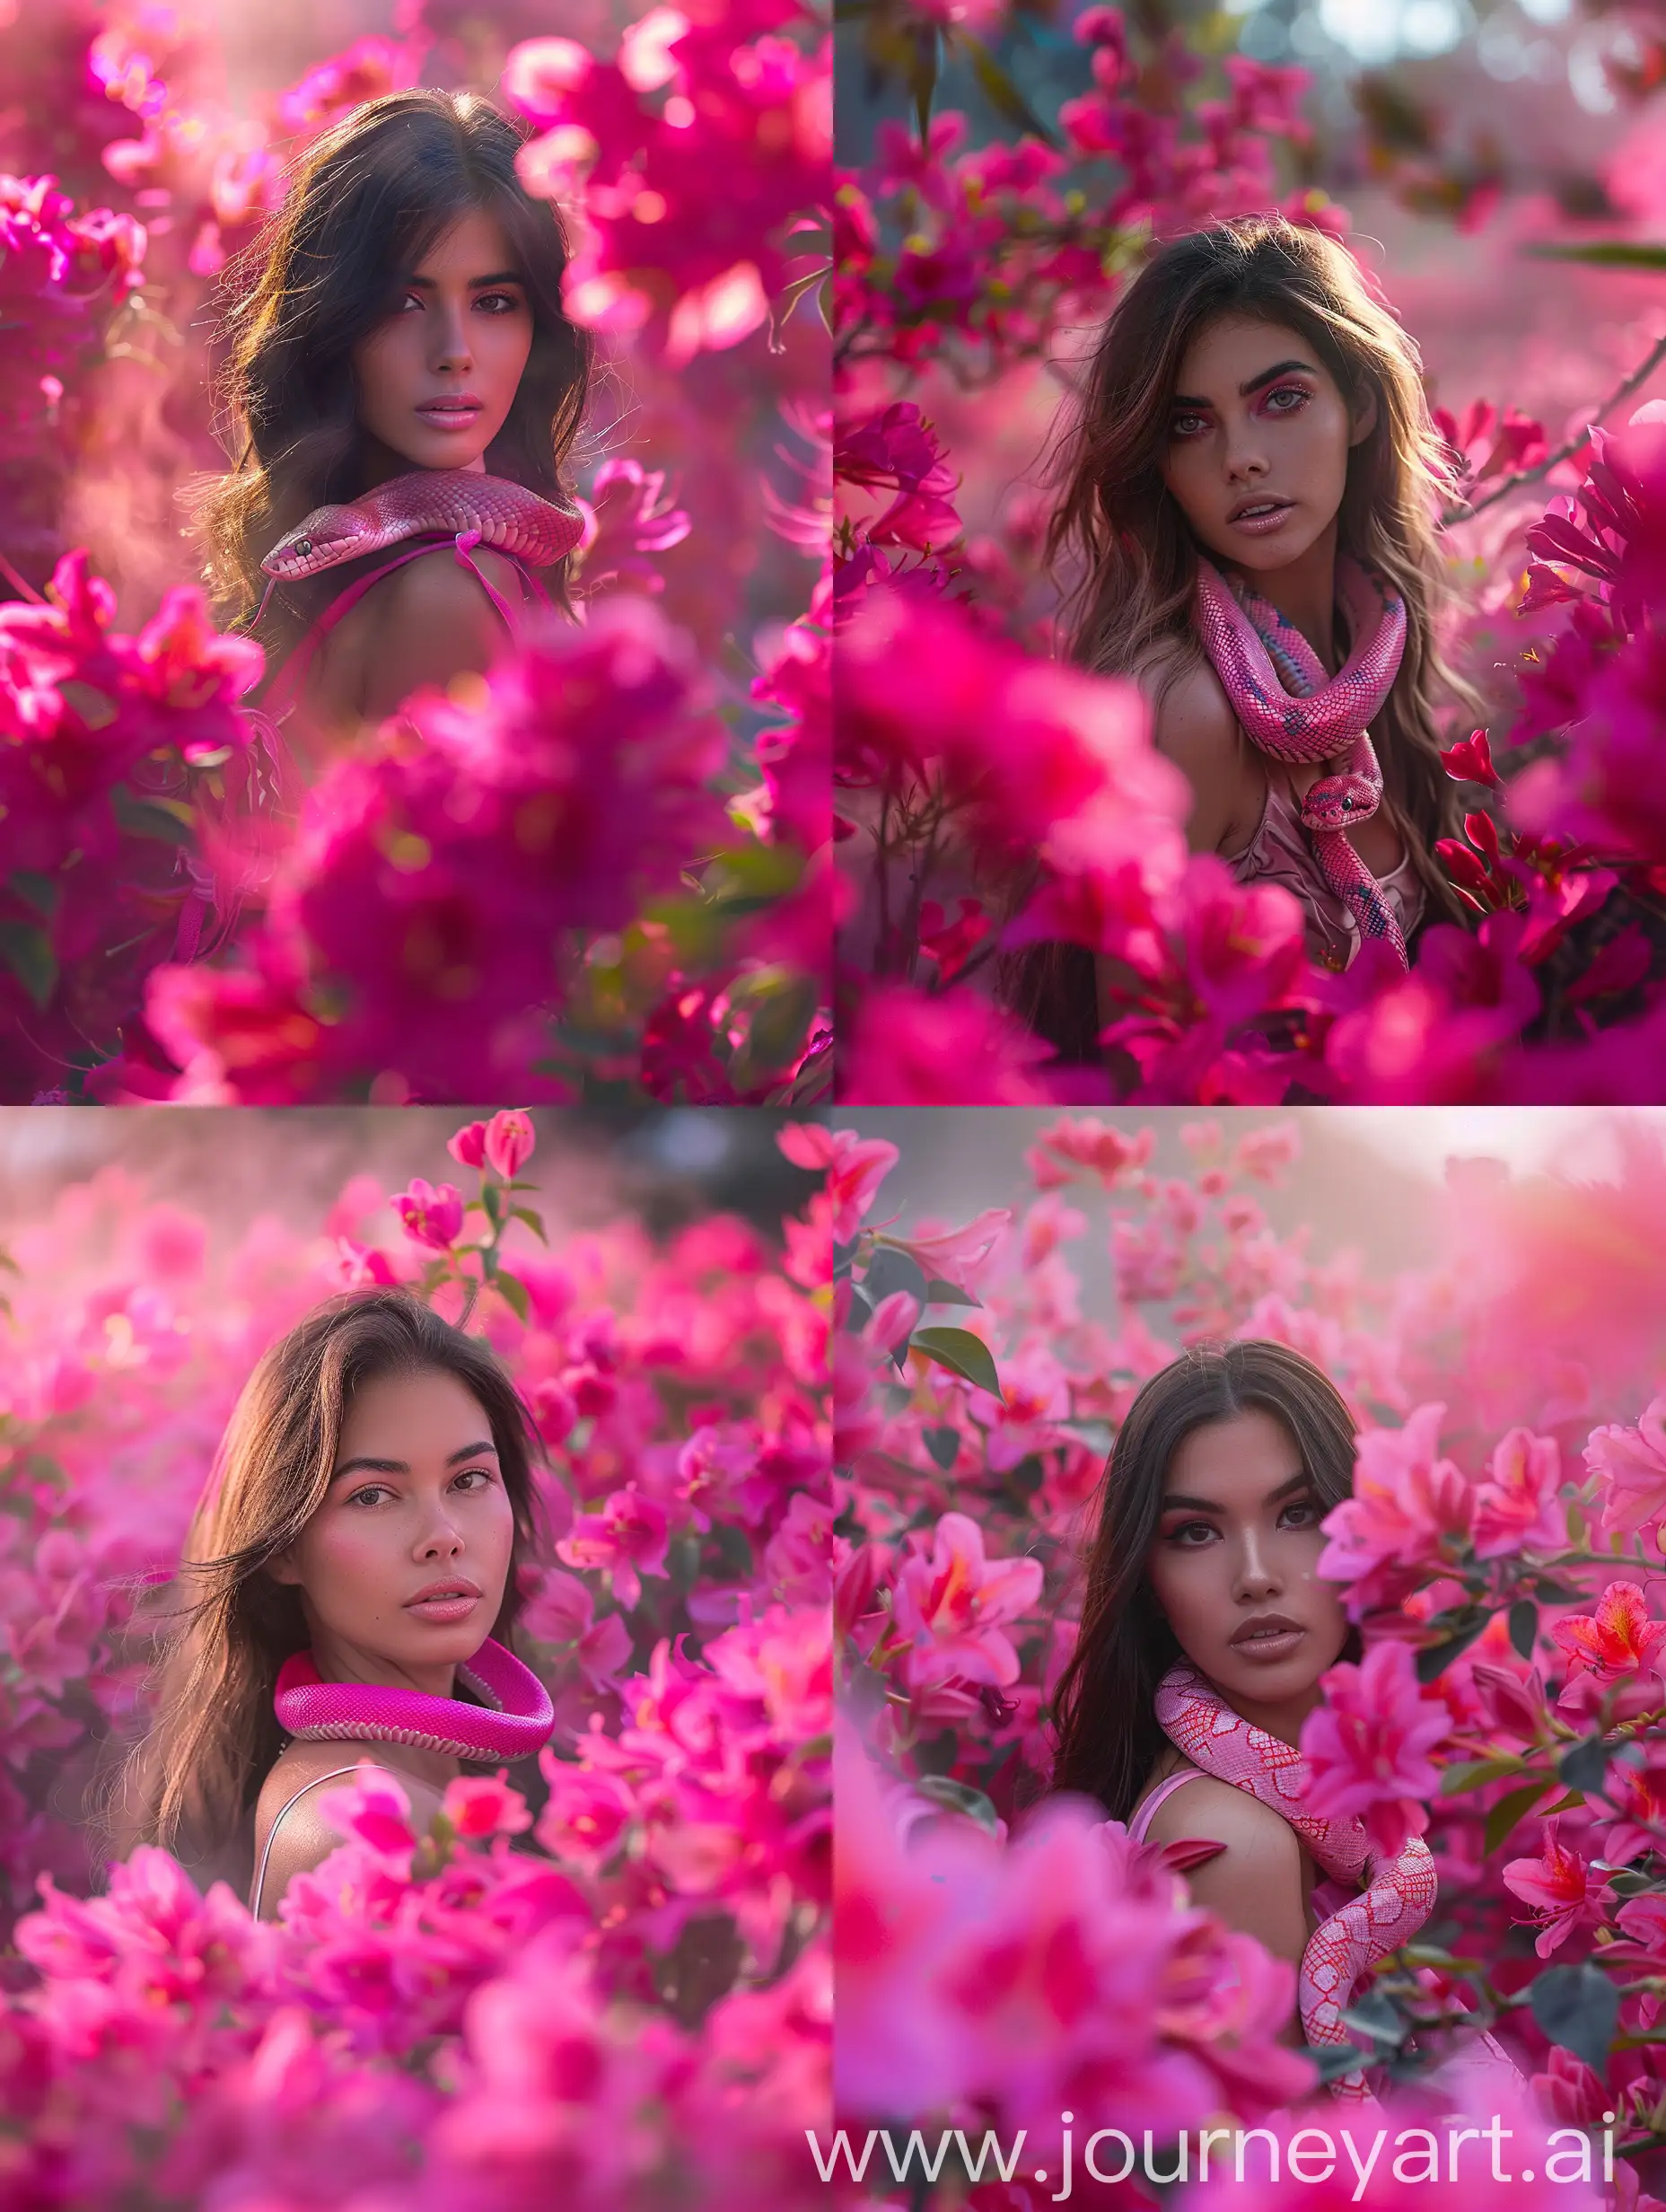 A portrait shot of a beautiful woman standing facing the camera with a pink snake wrapped around her neck and looking at the camera in the middle of a bunch of bright pink flowers in a mist of color and has a mysterious atmosphere.